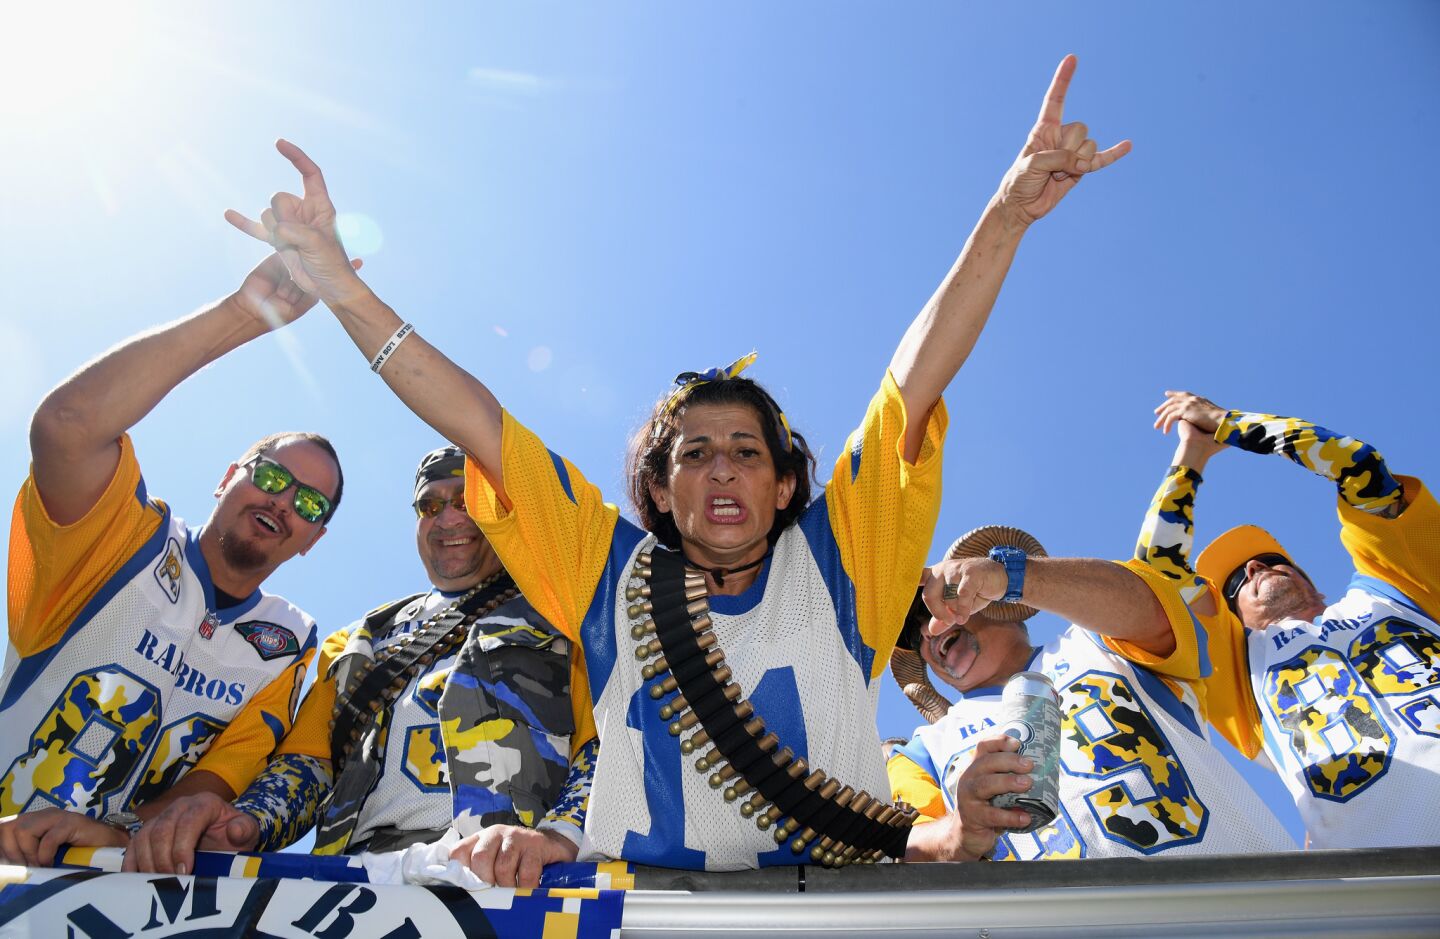 Los Angeles Rams fans cheer on their team before the start of the game against the Los Angeles Chargers at Los Angeles Memorial Coliseum on September 23, 2018 in Los Angeles, California.